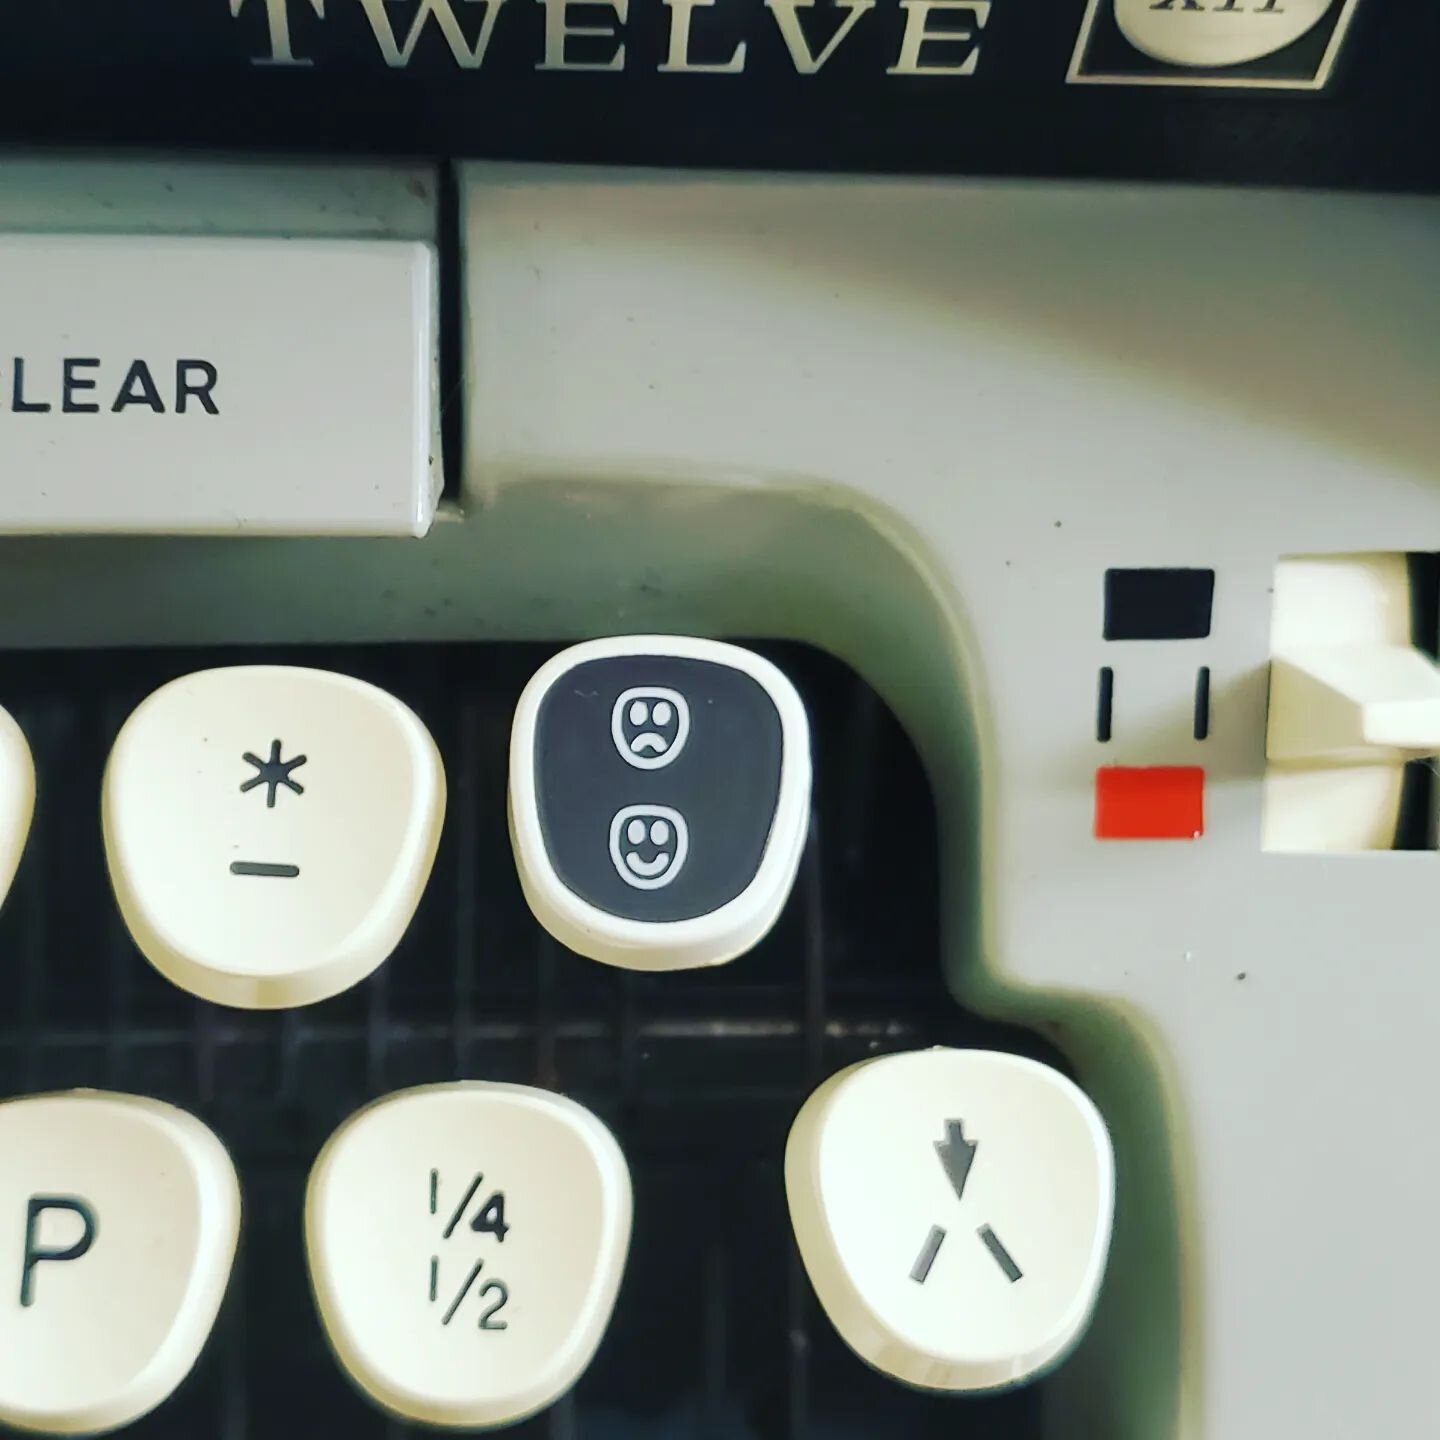 Don't you dare tell me typewriters can't use emoticons. 

 Welcome to my new hashtag... #vintageemoticon

#classictypewriter #writeon #writerscommunity #emoticon